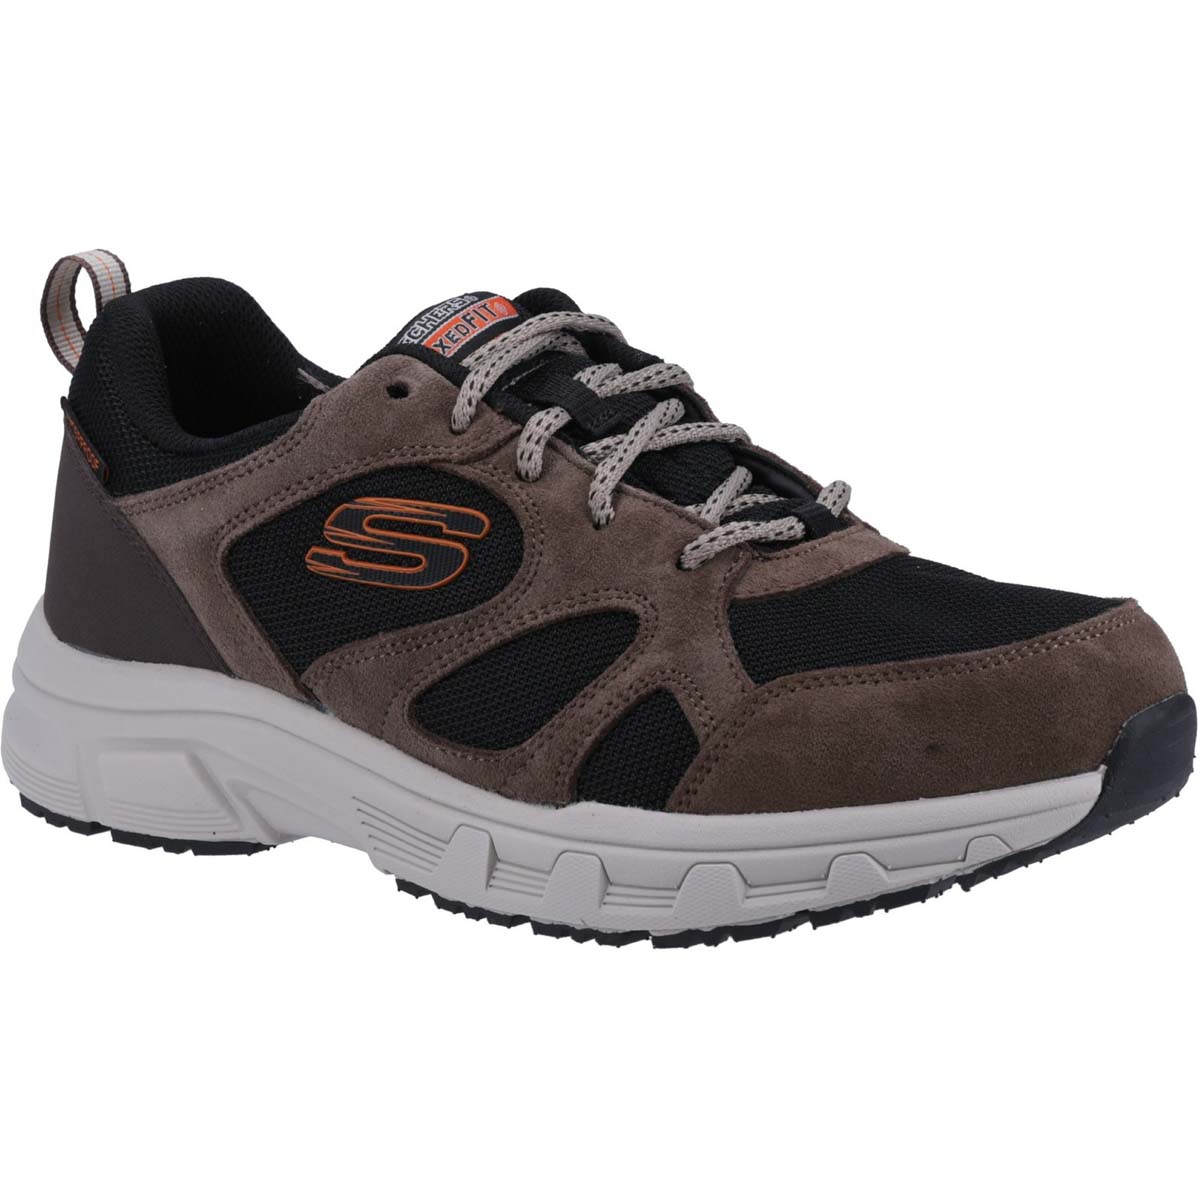 Skechers Oak Canyon Sunf BRBK Brown Mens comfort shoes in a Plain Leather and Man-made in Size 6